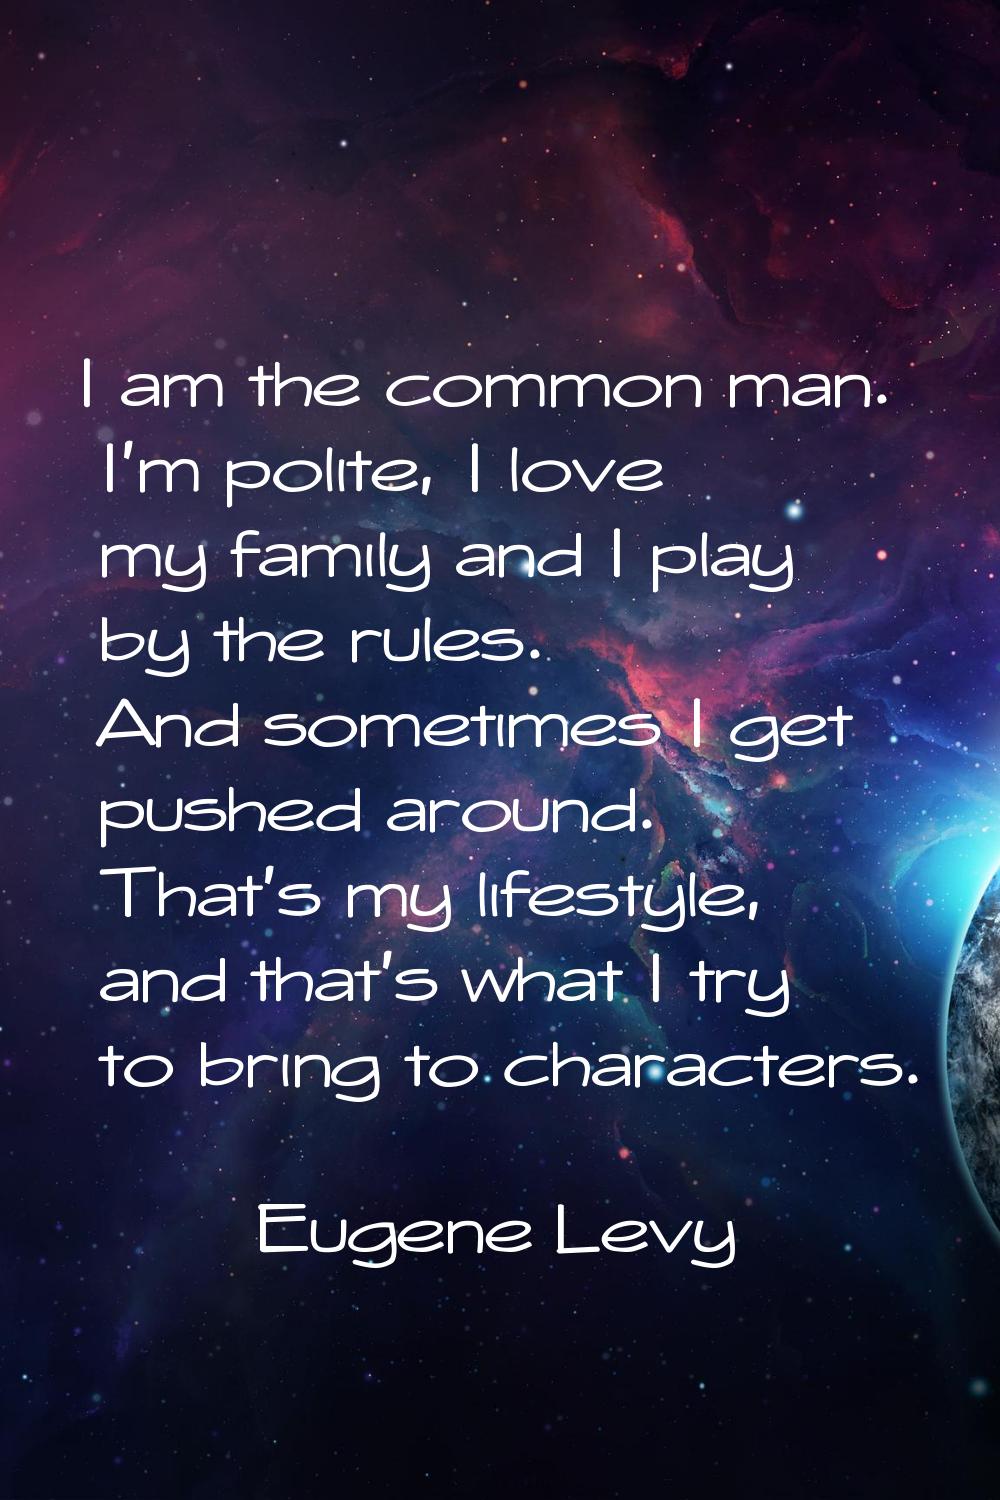 I am the common man. I'm polite, I love my family and I play by the rules. And sometimes I get push